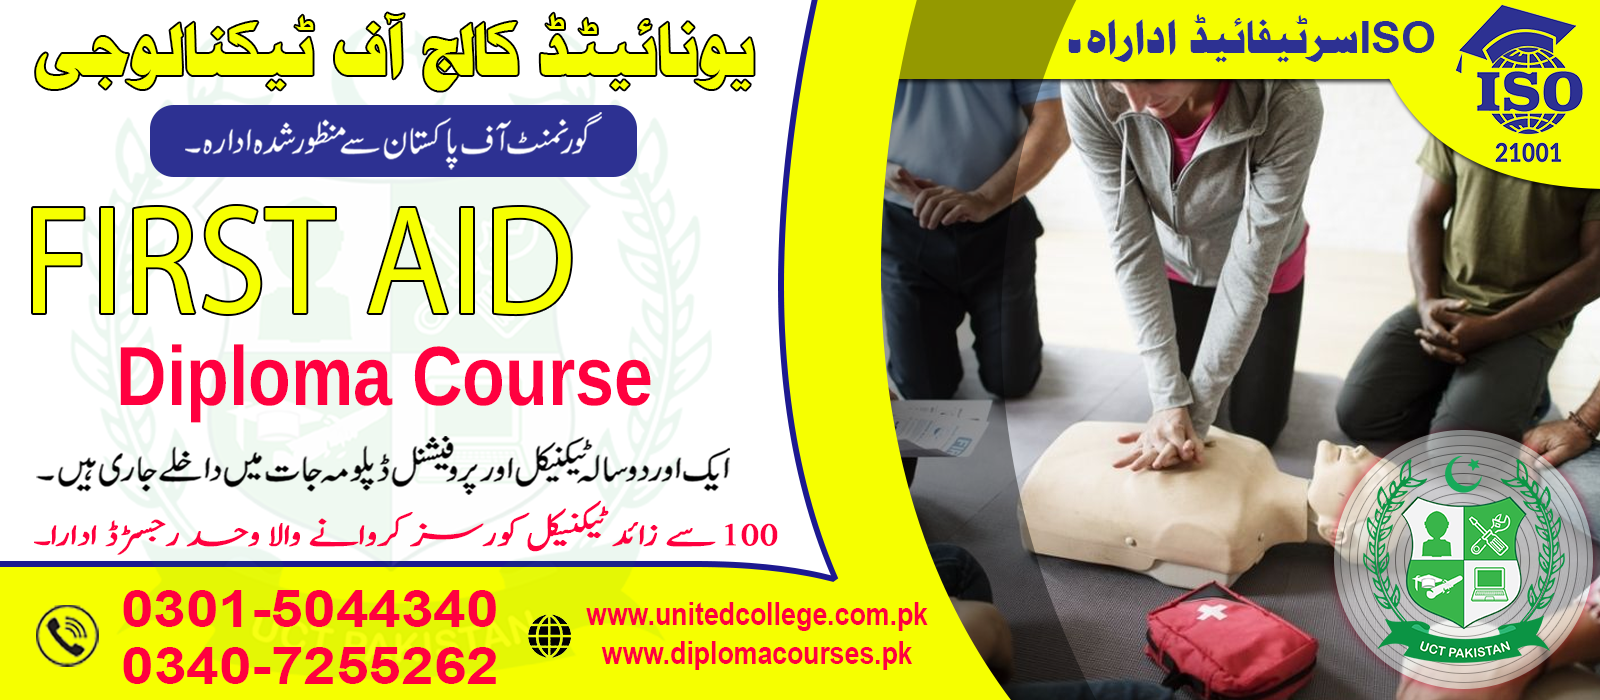 FIRST AID COURSE